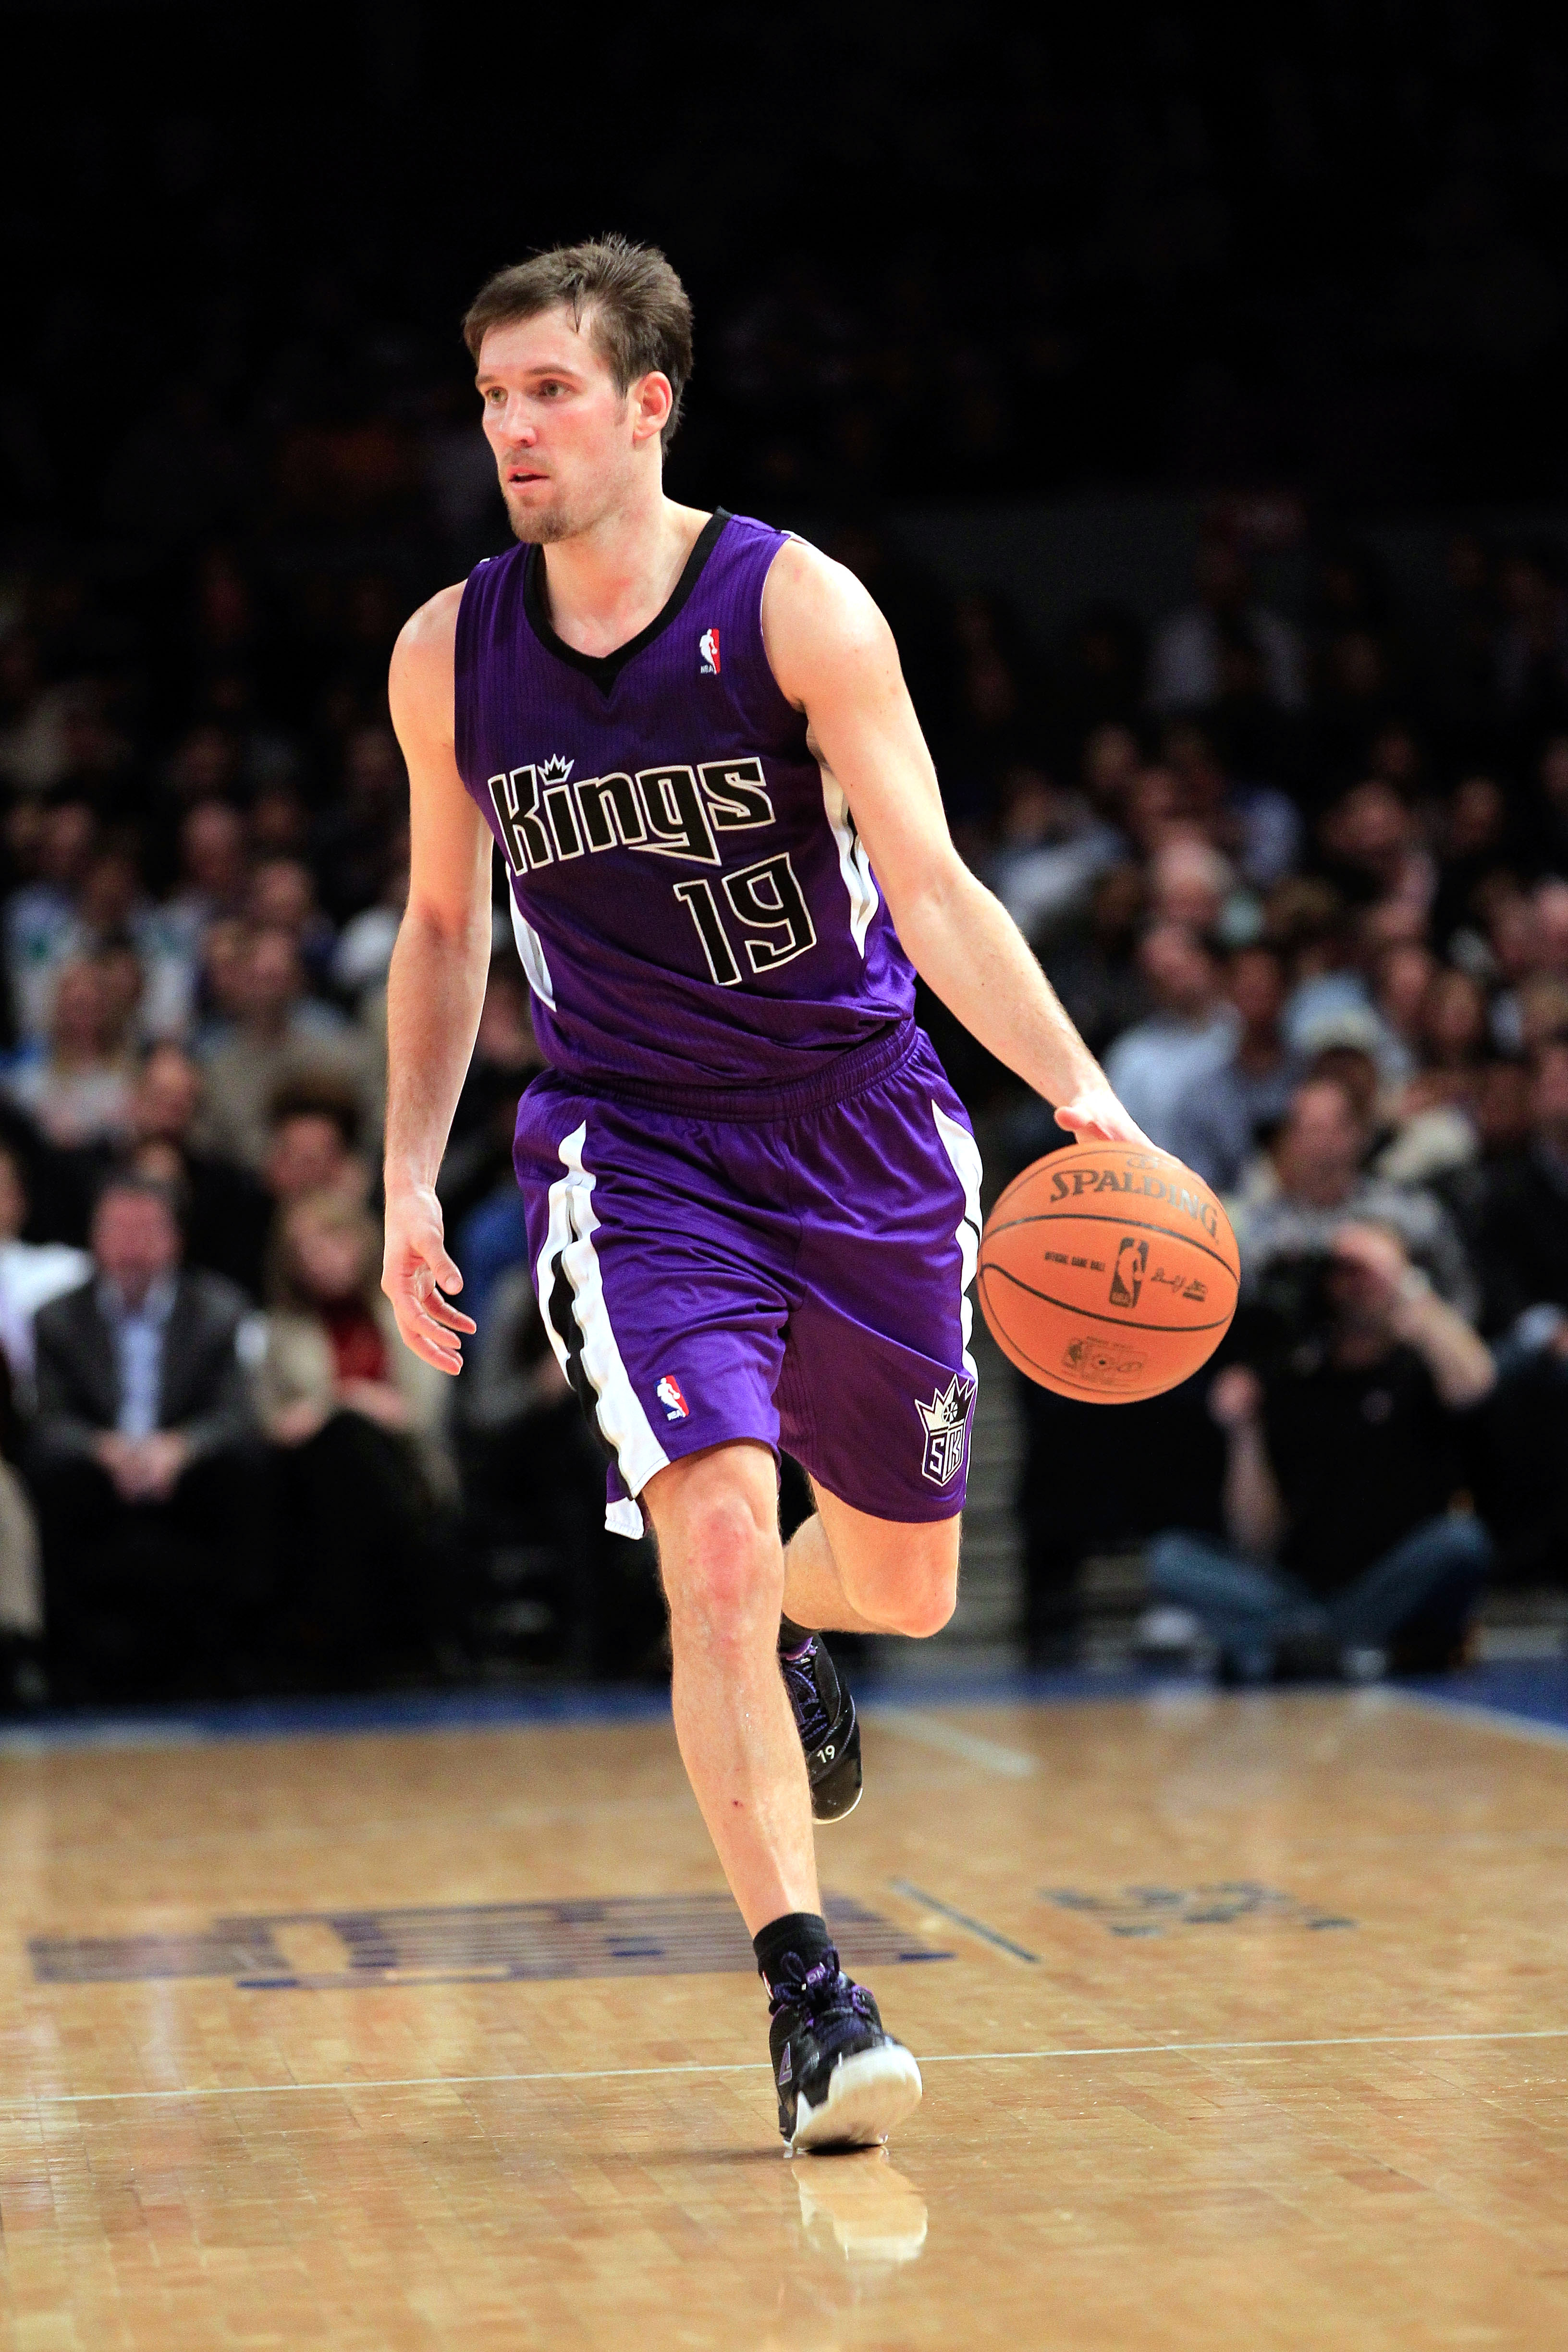 NEW YORK, NY - JANUARY 14: Beno Udrih #19 of the Sacramento Kings dribbles the ball against the New York Knicks at Madison Square Garden on January 14, 2011 in New York City. NOTE TO USER: User expressly acknowledges and agrees that, by downloading and or